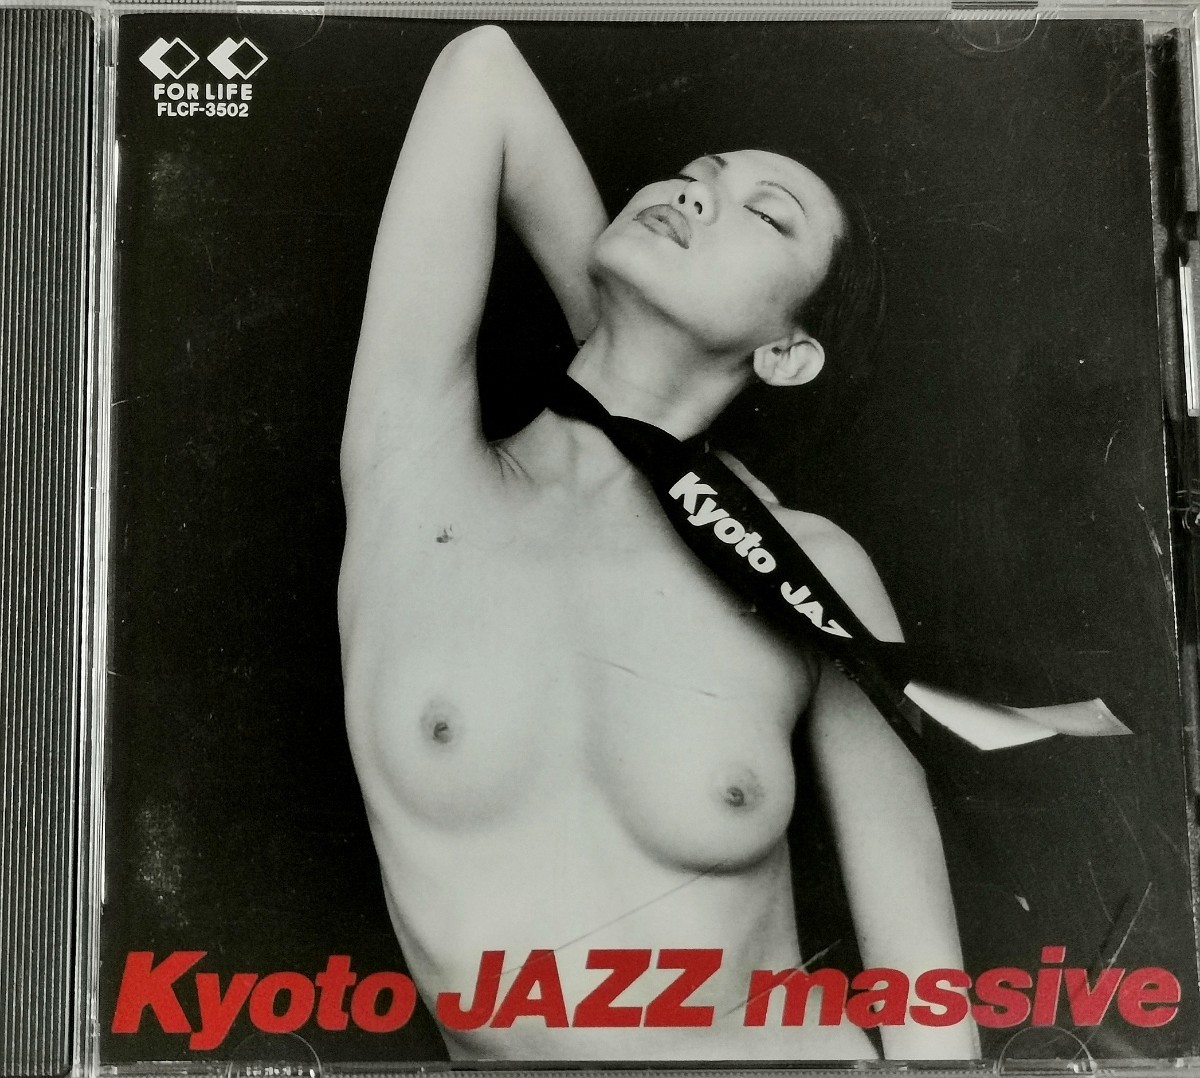 [KYOTO JAZZ MASSIVE/st] DJ KRUSH/MONDO GROSSO/MASTERS AT WORK/MAW/ domestic CD/ for searching gilles peterson united future organization